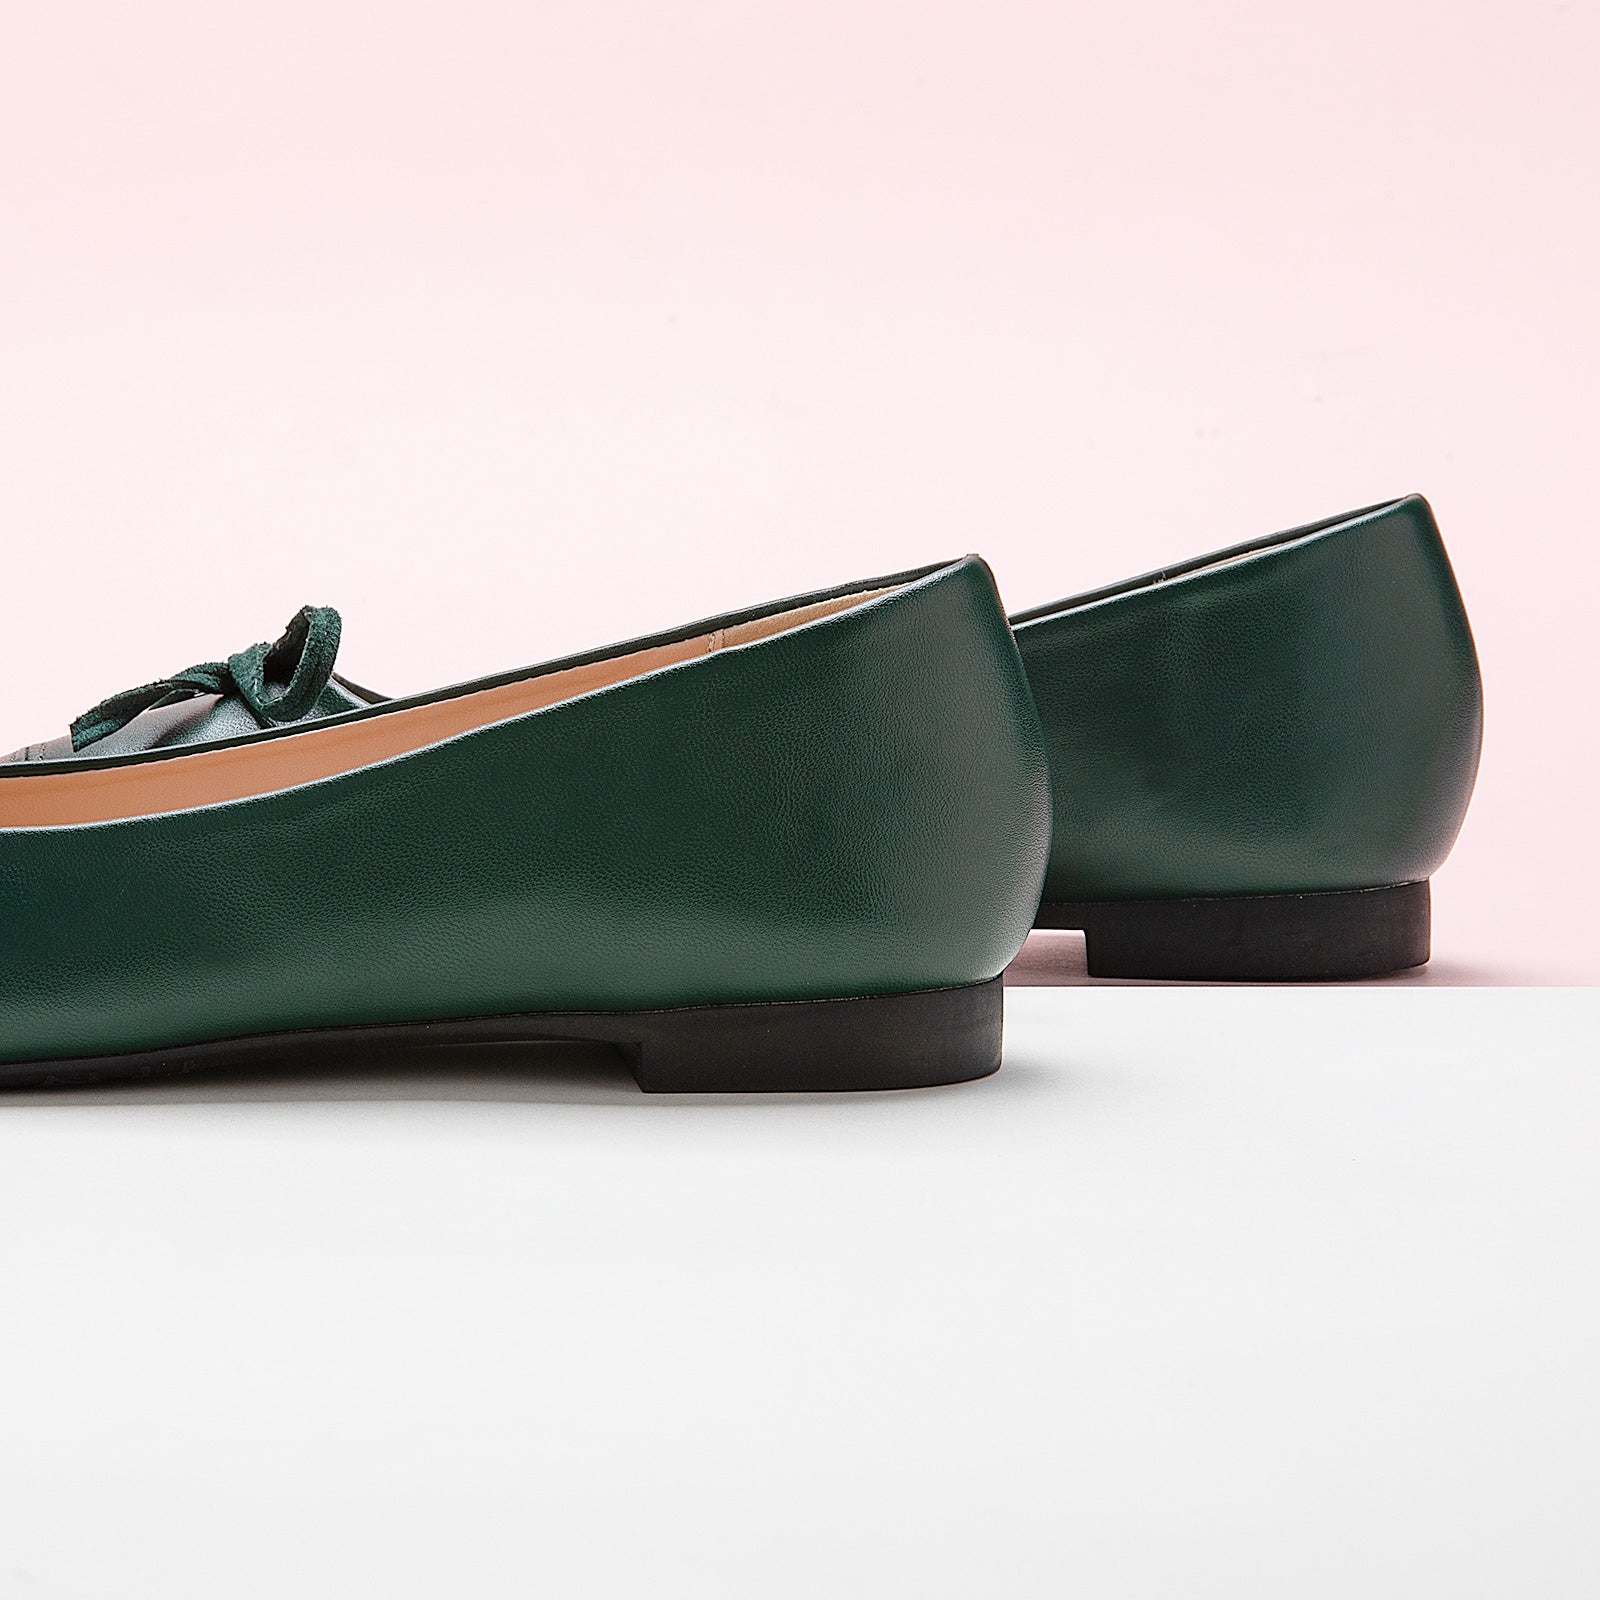 Dark Green Suede Ballet Flats with a charming bow detail, bringing a touch of nature-inspired elegance to your footwear collection